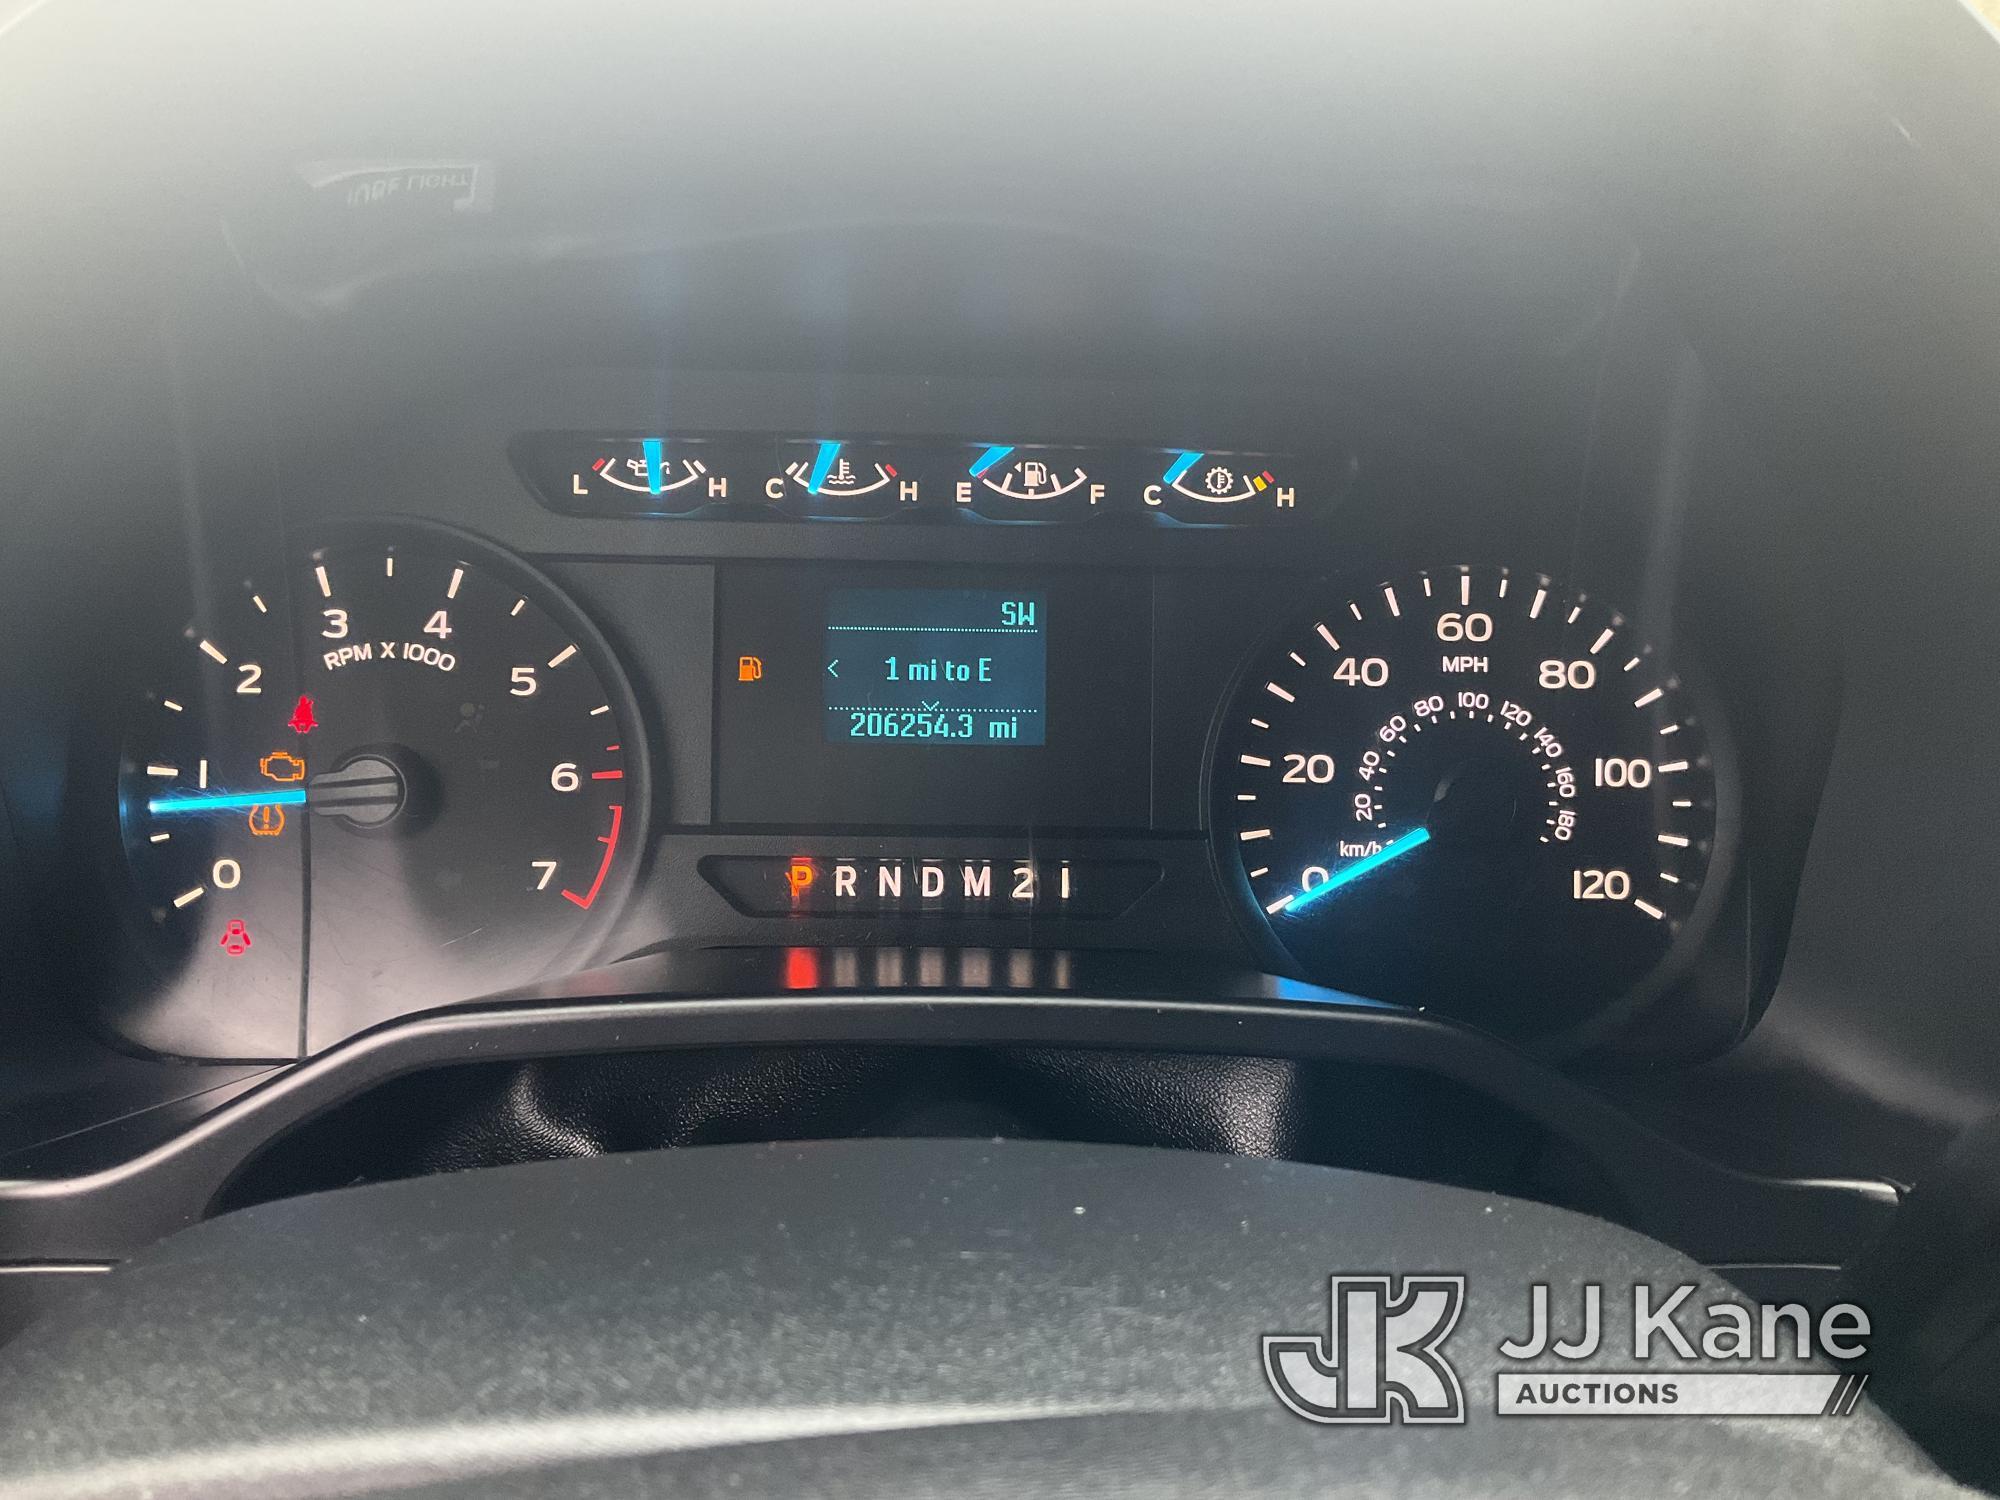 (Shrewsbury, MA) 2016 Ford F150 4x4 Extended-Cab Pickup Truck Runs & Moves) (Check Engine Light On,